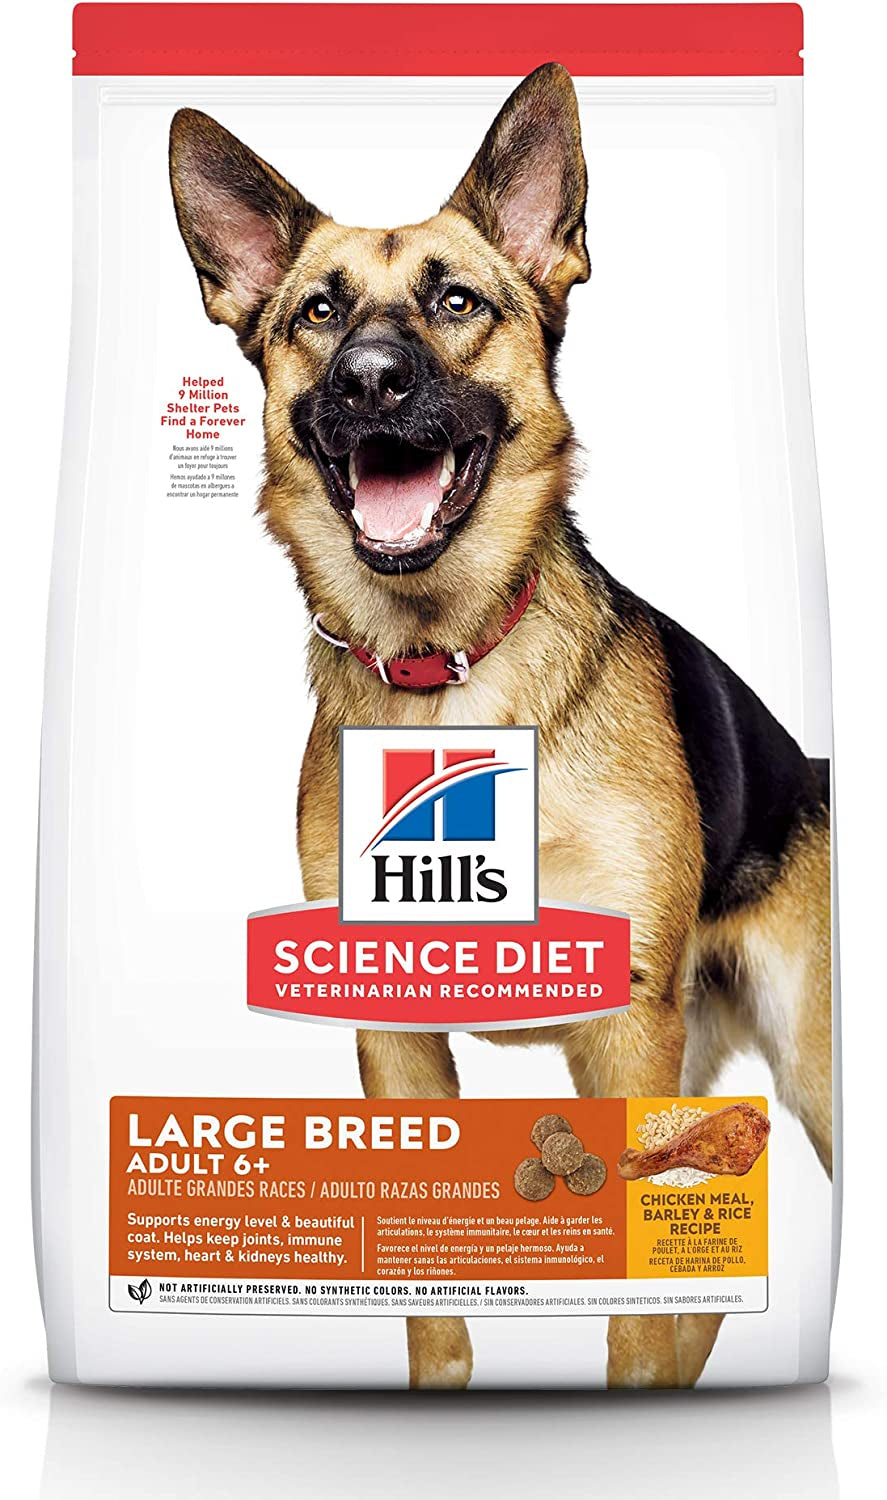 Hill'S Science Diet Dry Dog Food, Large Breed Adult 6+ Senior, Chicken, Barley & Rice Recipe, 33 Lb. Bag